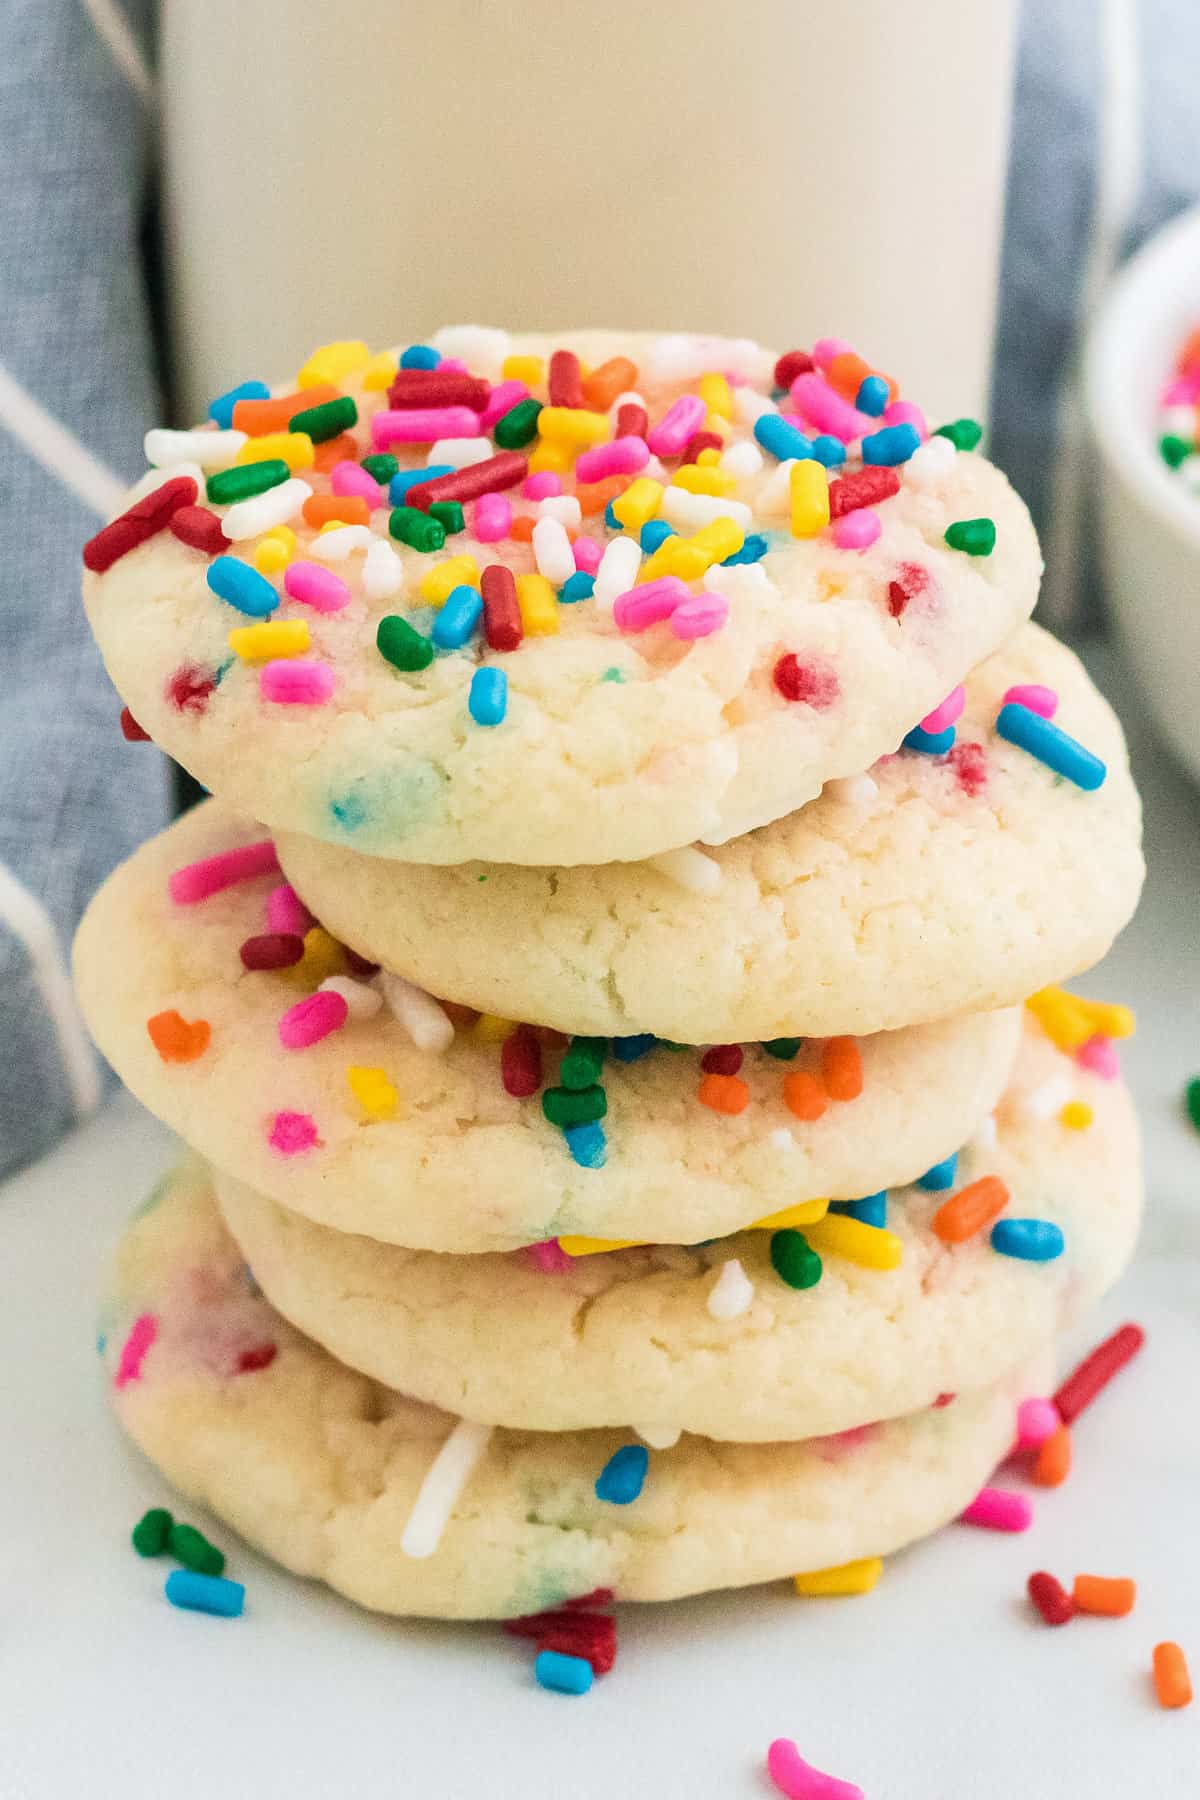 Stack of funfetti cake mix cookies with sprinkles next to a glass of milk.